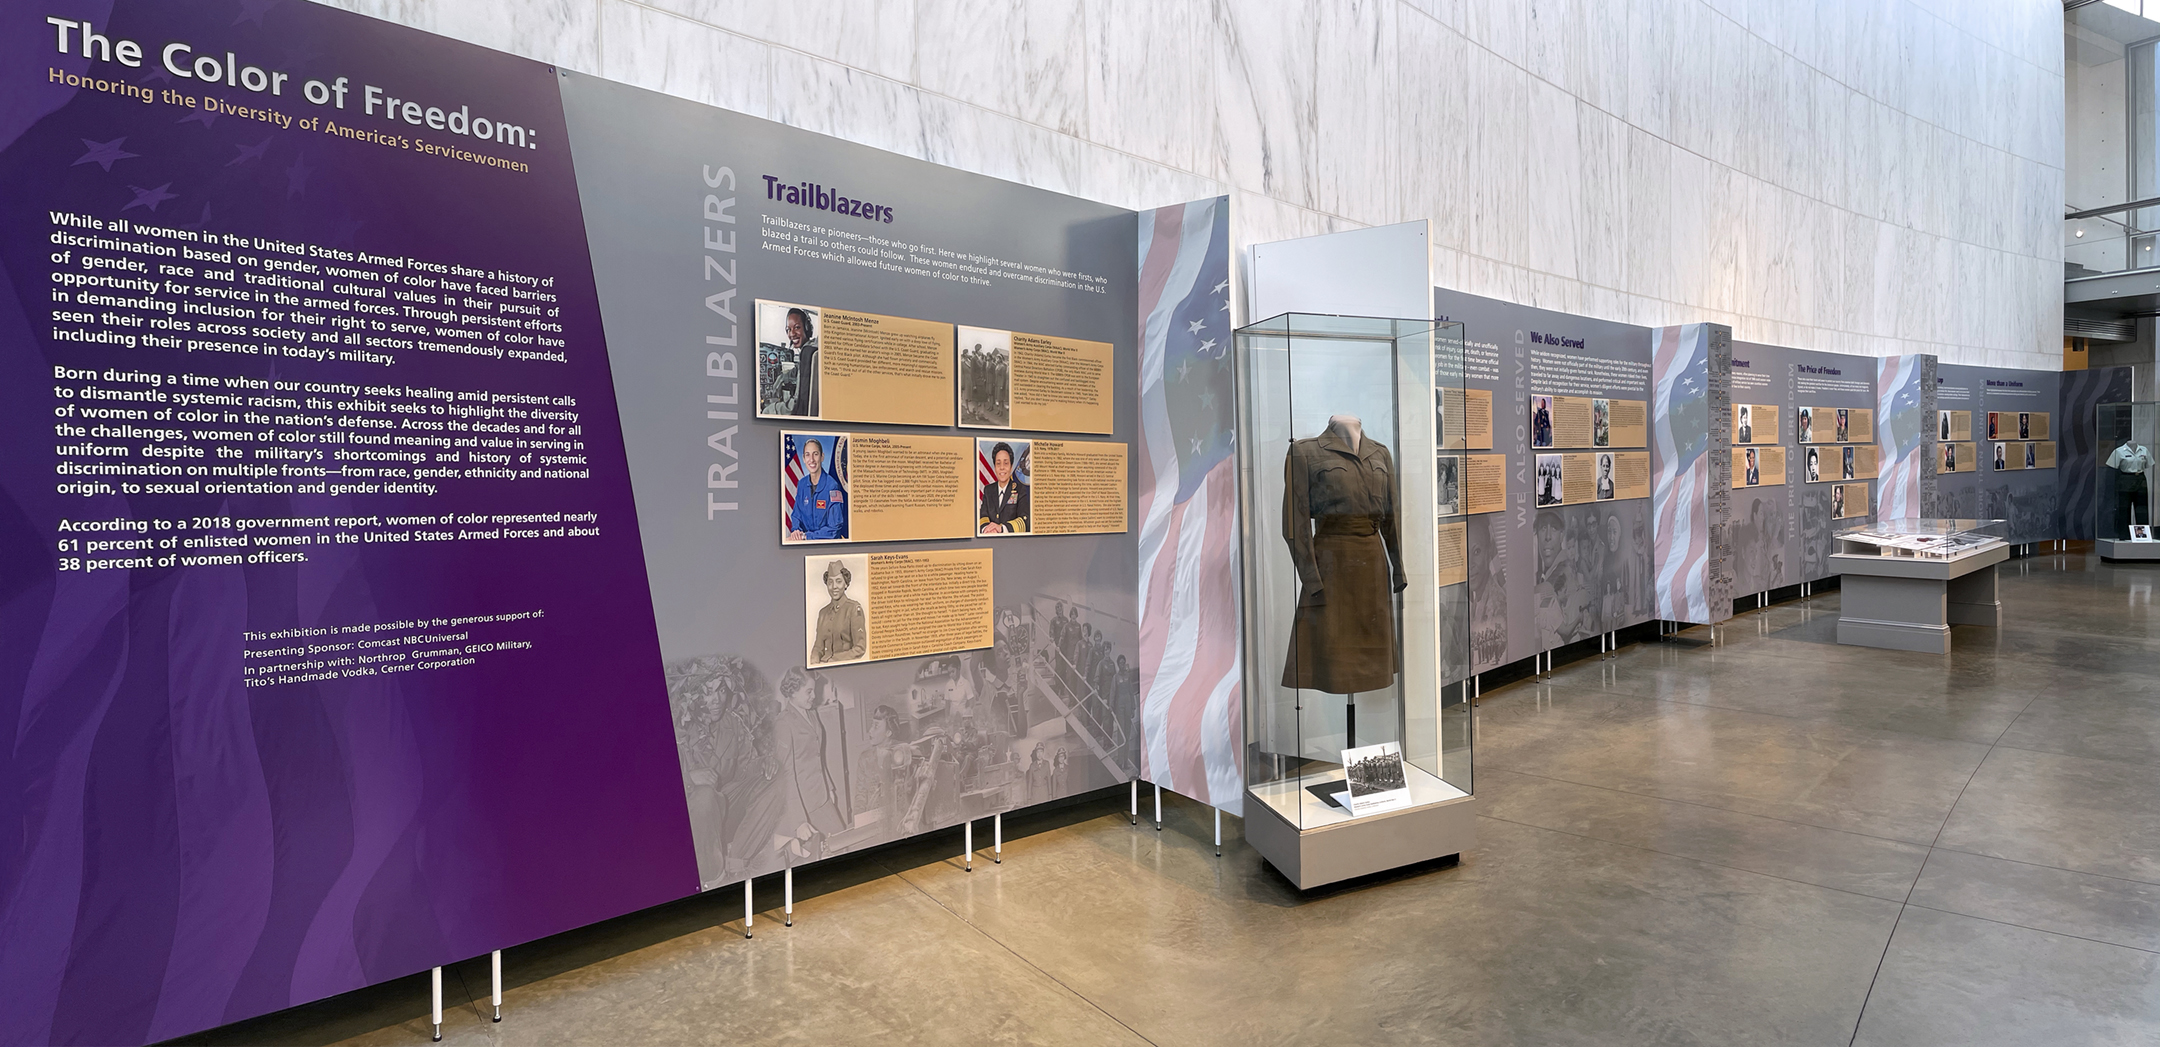 Color of Freedom Exhibit showing military servicewomen trailblazers, of minorities through history from the Civil War to today